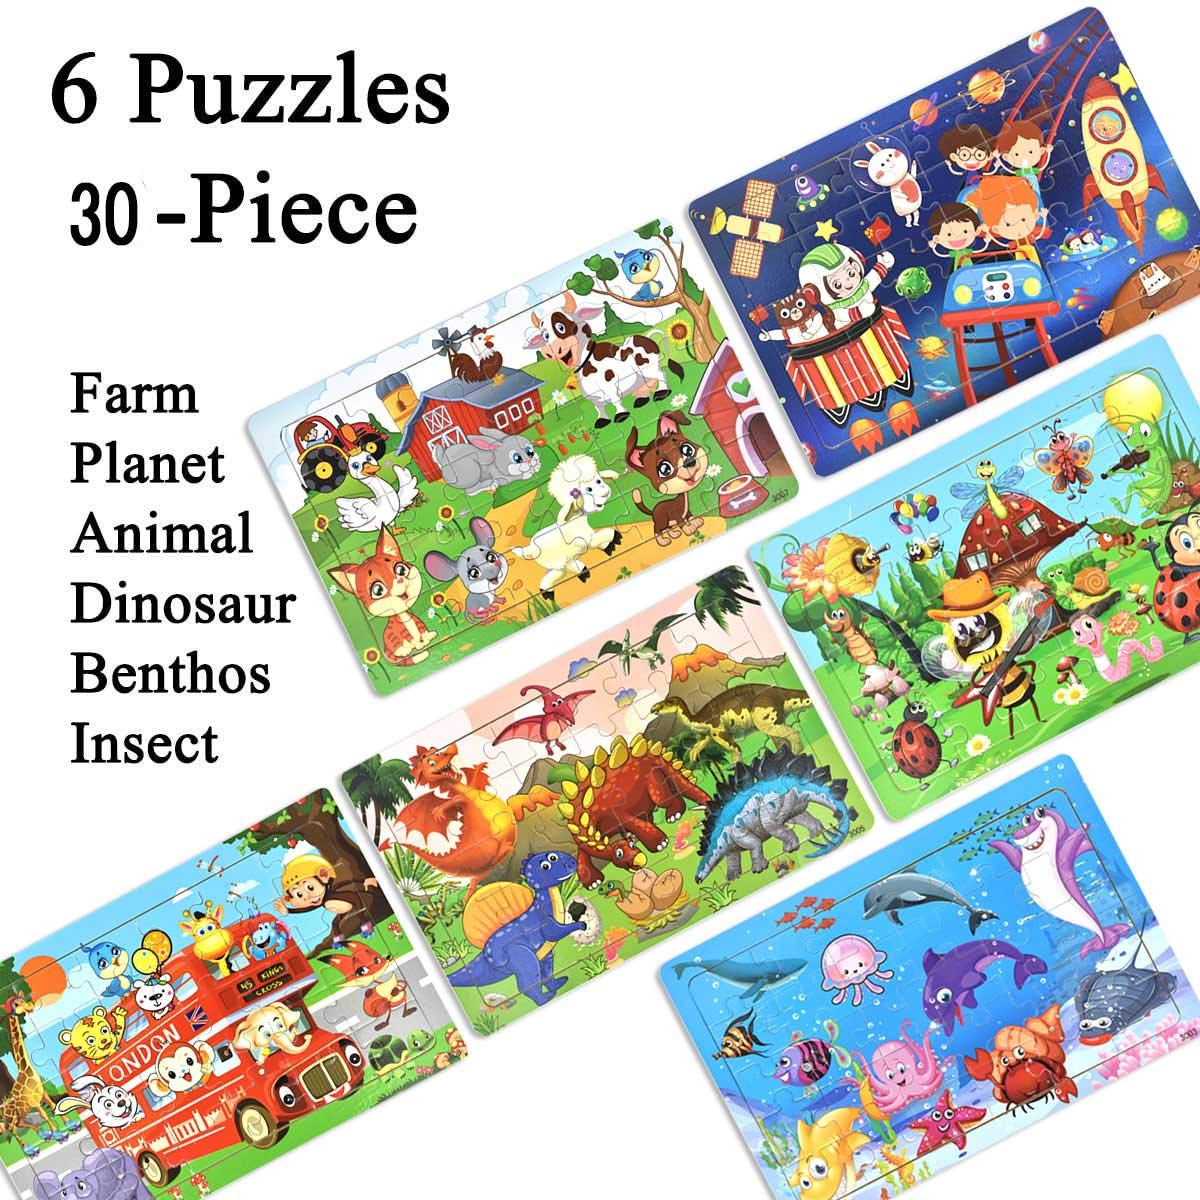 Wooden Jigsaw puzzles for kids ages 3-5 Year Old 30 Piece Colorful Wooden Puzzles for Toddler Children Learning Educational Puzzles Toys for Boys and Girls Set for Kids 3 4 5 6 Year Old (6 Puzzles)